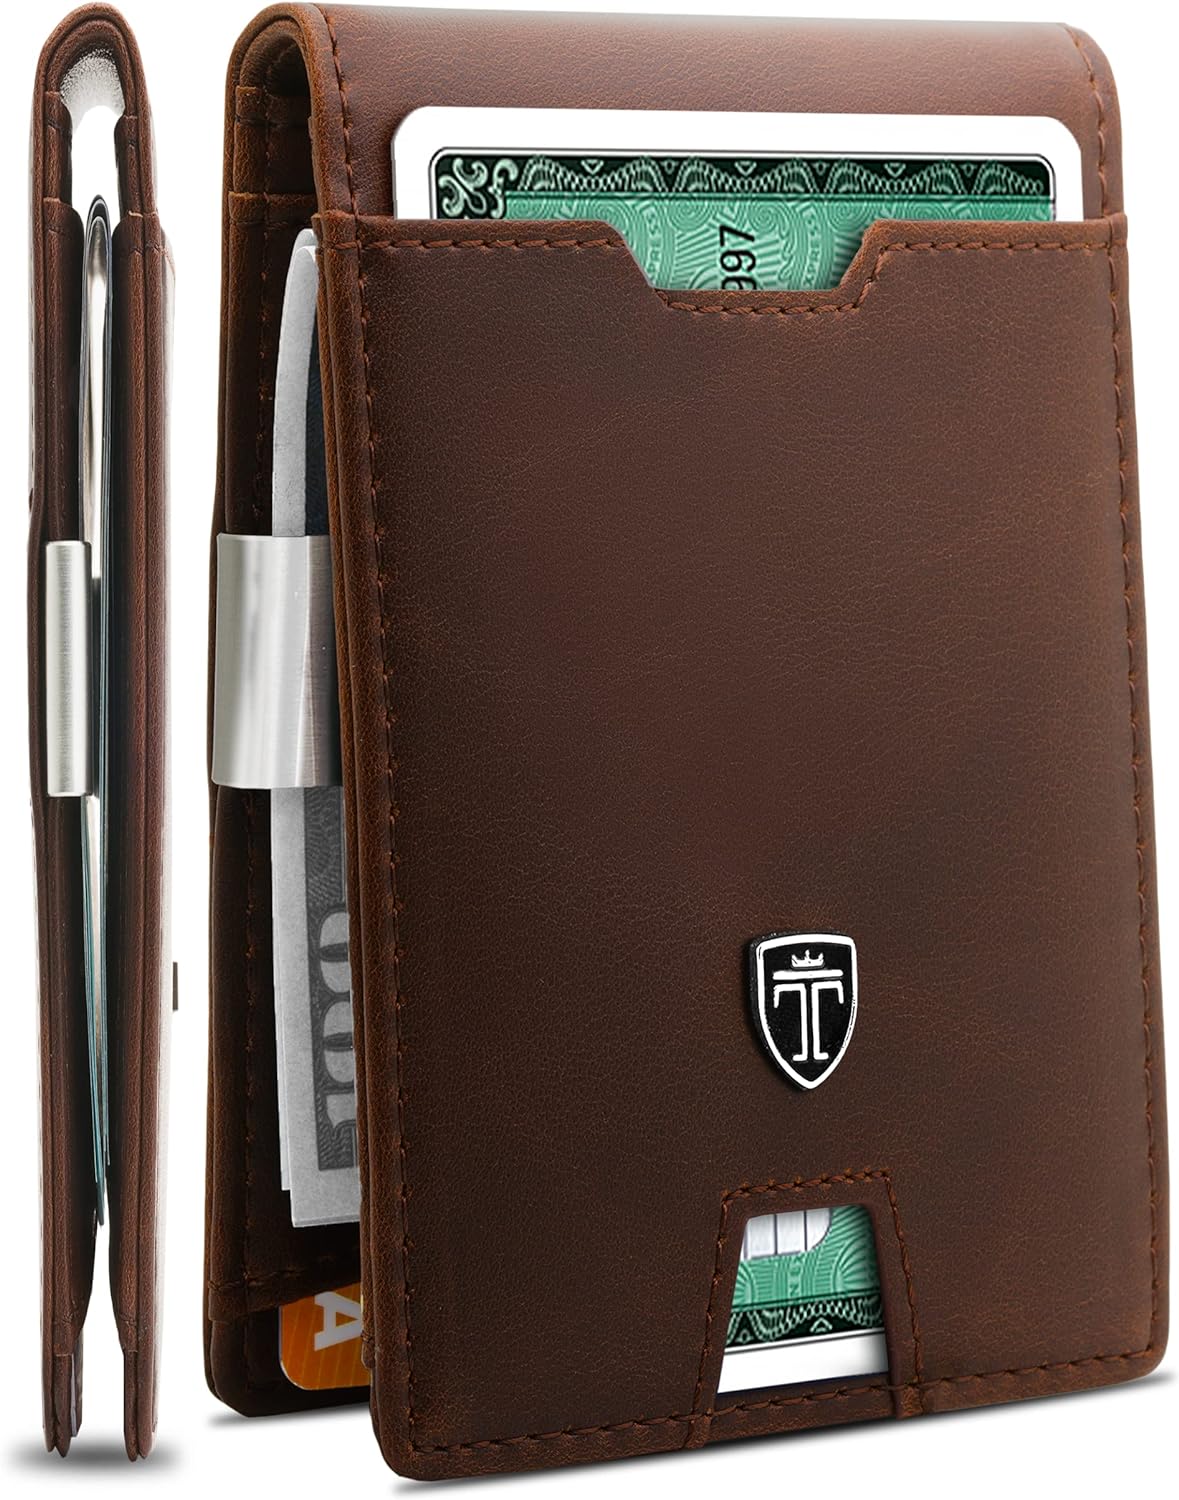 SleekGuard AUSTIN: Elevate Your Everyday with RFID-Blocking Slim Wallet & Money Clip – Stylish Security in a Gift-Ready Box